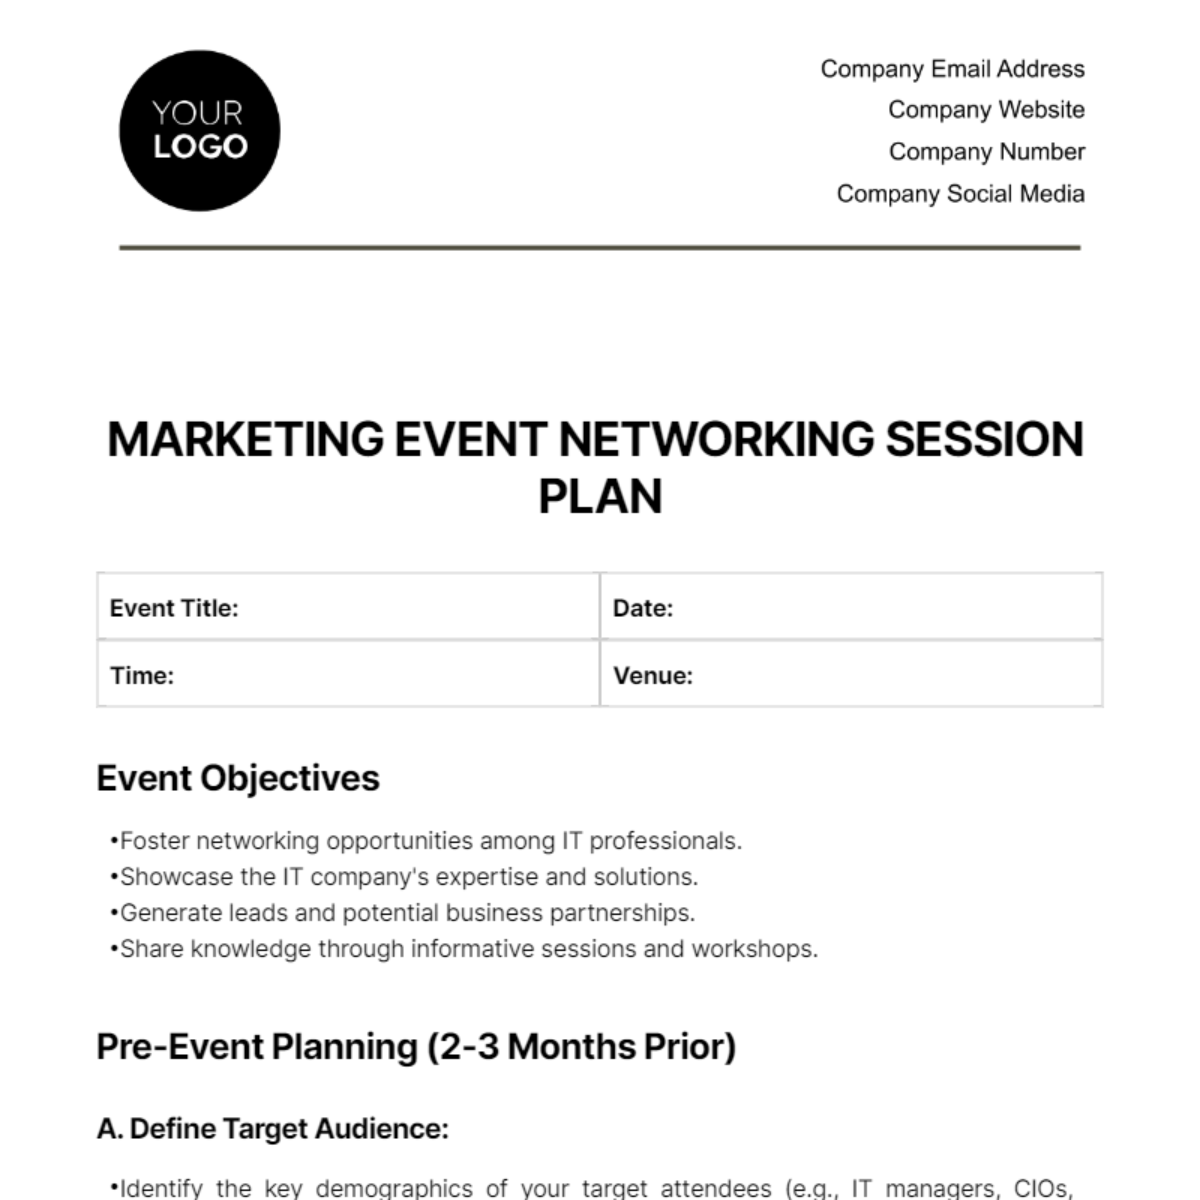 Marketing Event Networking Session Plan Template